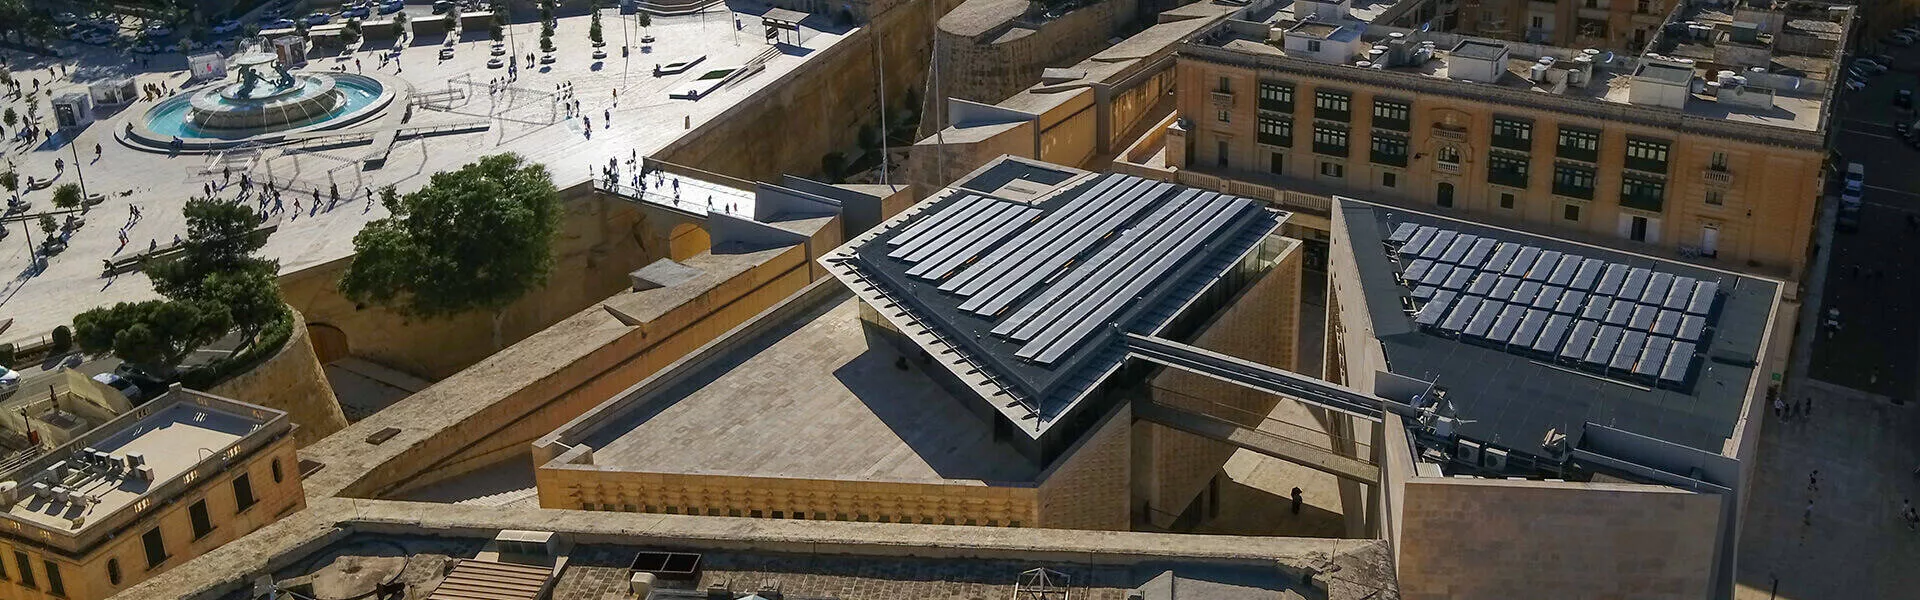 Rooftop Solar System on the Parliament Building